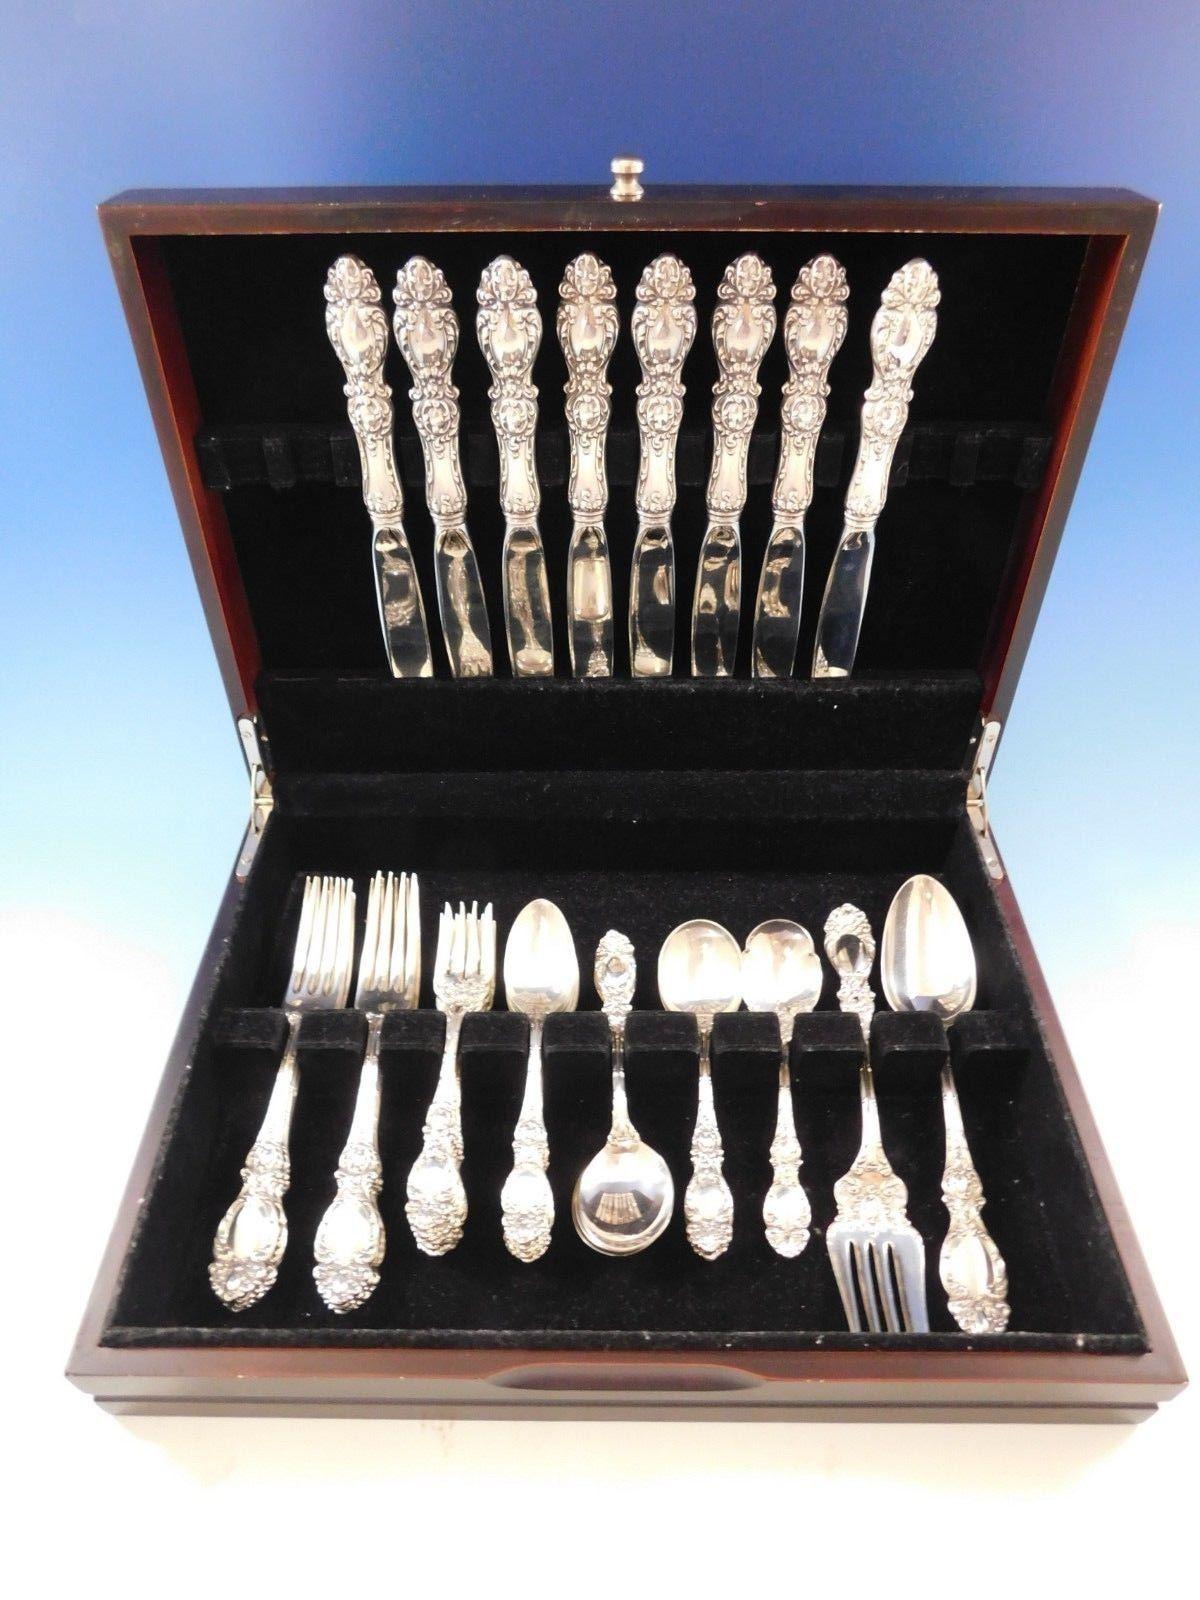 Beautiful lucerne by Wallace sterling sterling silver flatware set - 43 Pieces. This set includes:

Eight dinner knives, 9 3/4